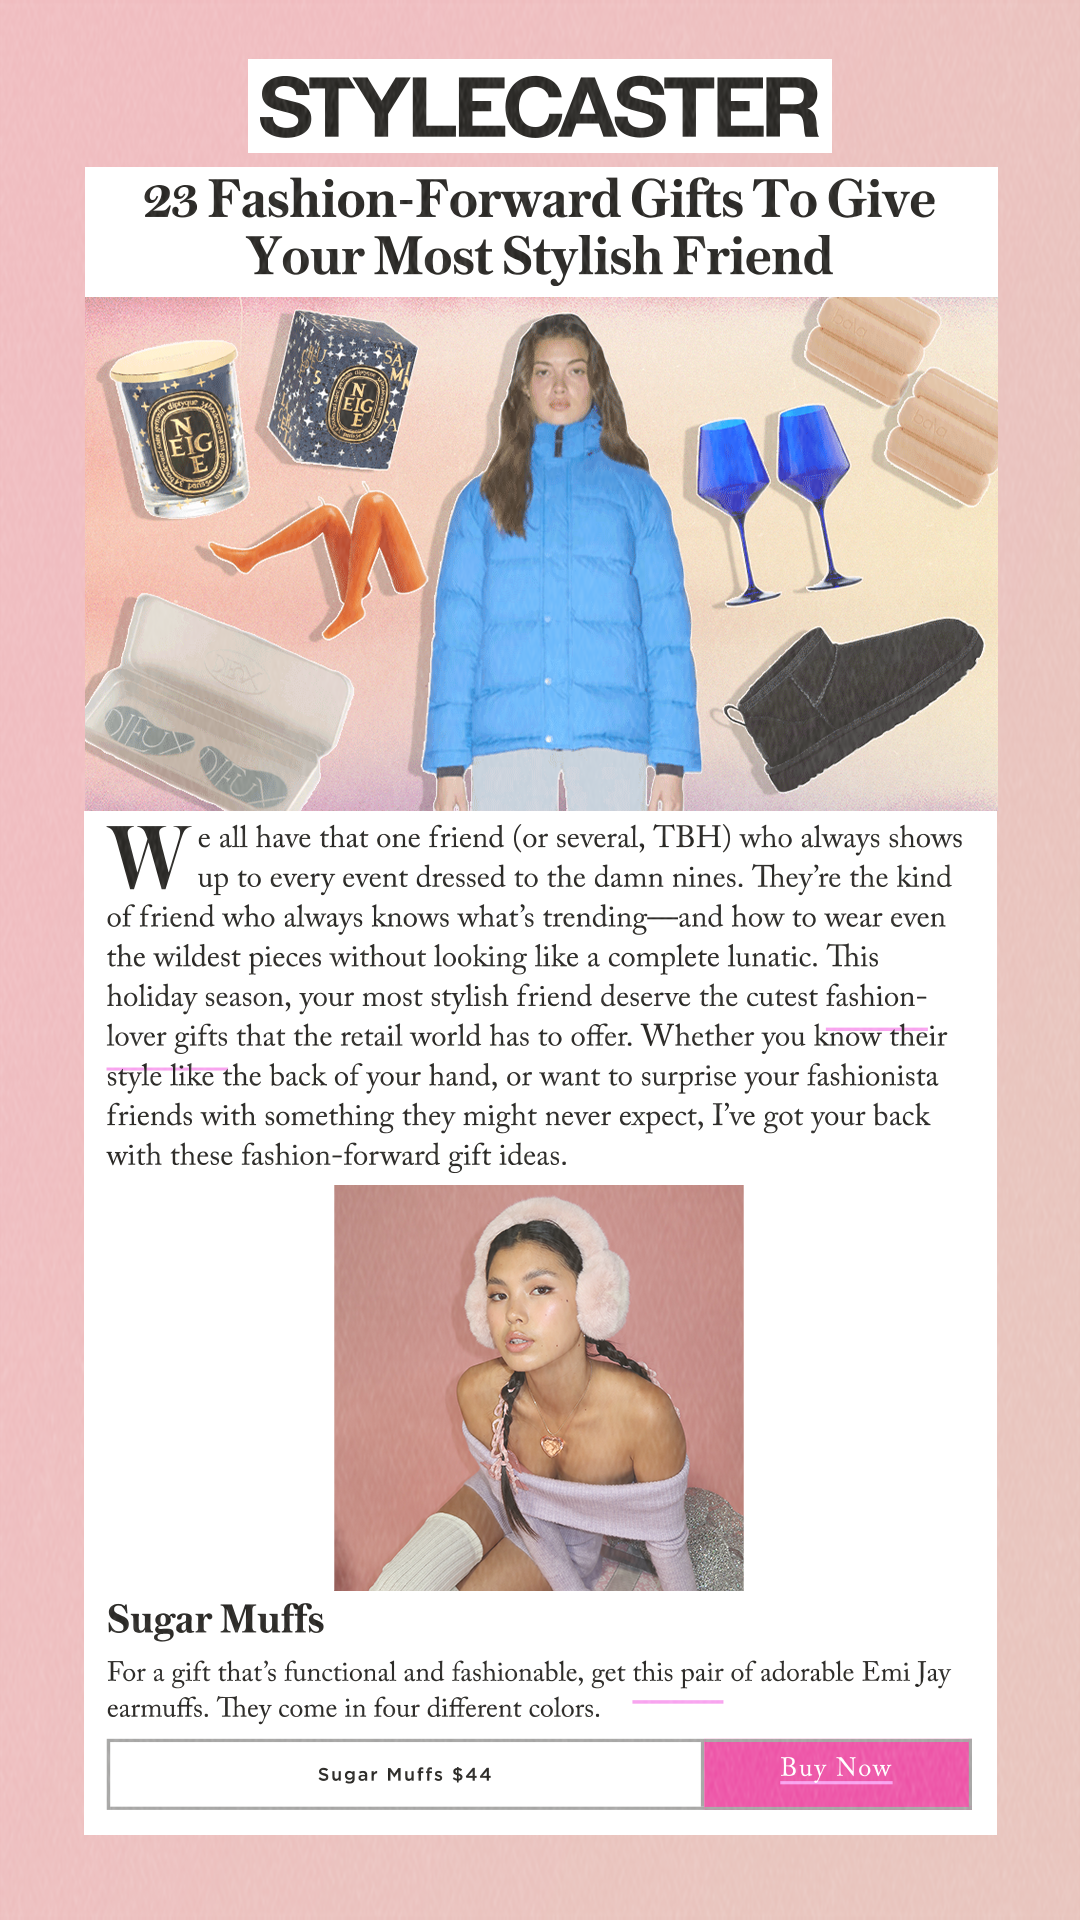 23 Fashion-Forward Gifts To Give Your Most Stylish Friend We all have that one friend (or several, TBH) who always shows up to every event dressed to the damn nines. They’re the kind of friend who always knows what’s trending—and how to wear even the wildest pieces without looking like a complete lunatic. This holiday season, your most stylish friend deserve the cutest fashion-lover gifts that the retail world has to offer. Whether you know their style like the back of your hand, or want to surprise your fashionista friends with something they might never expect, I’ve got your back with these fashion-forward gift ideas. Sugar Muffs For a gift that’s functional and fashionable, get this pair of adorable Emi Jay earmuffs. They come in four different colors. Sugar Muffs $44 Buy Now